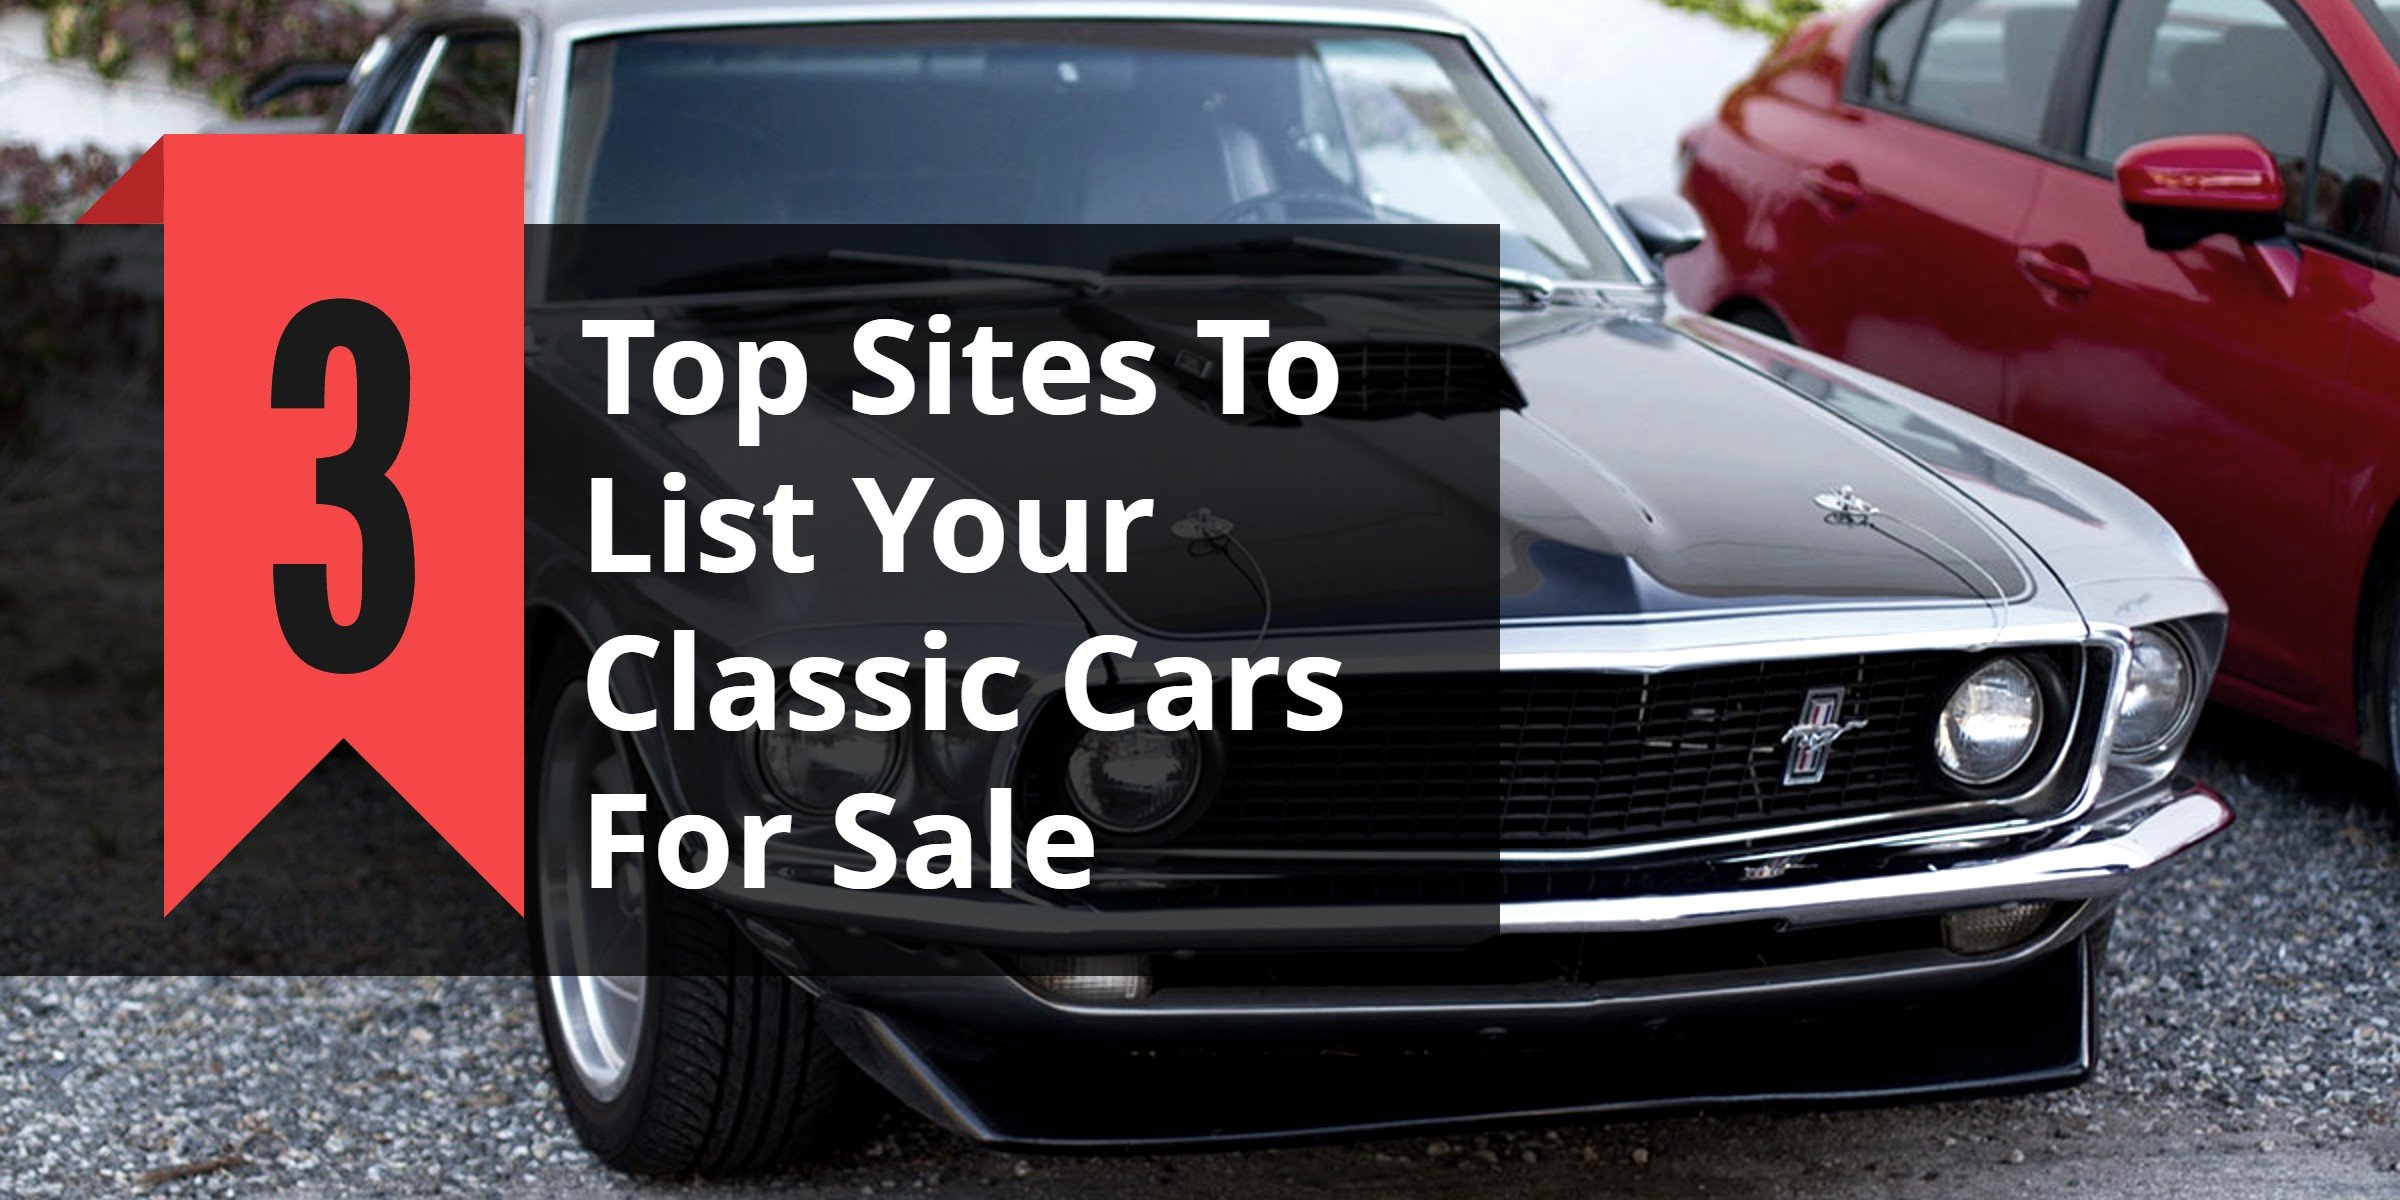 Top 3 Car Selling Sites In 2020 To Sell Your Classic Car To International Buyers